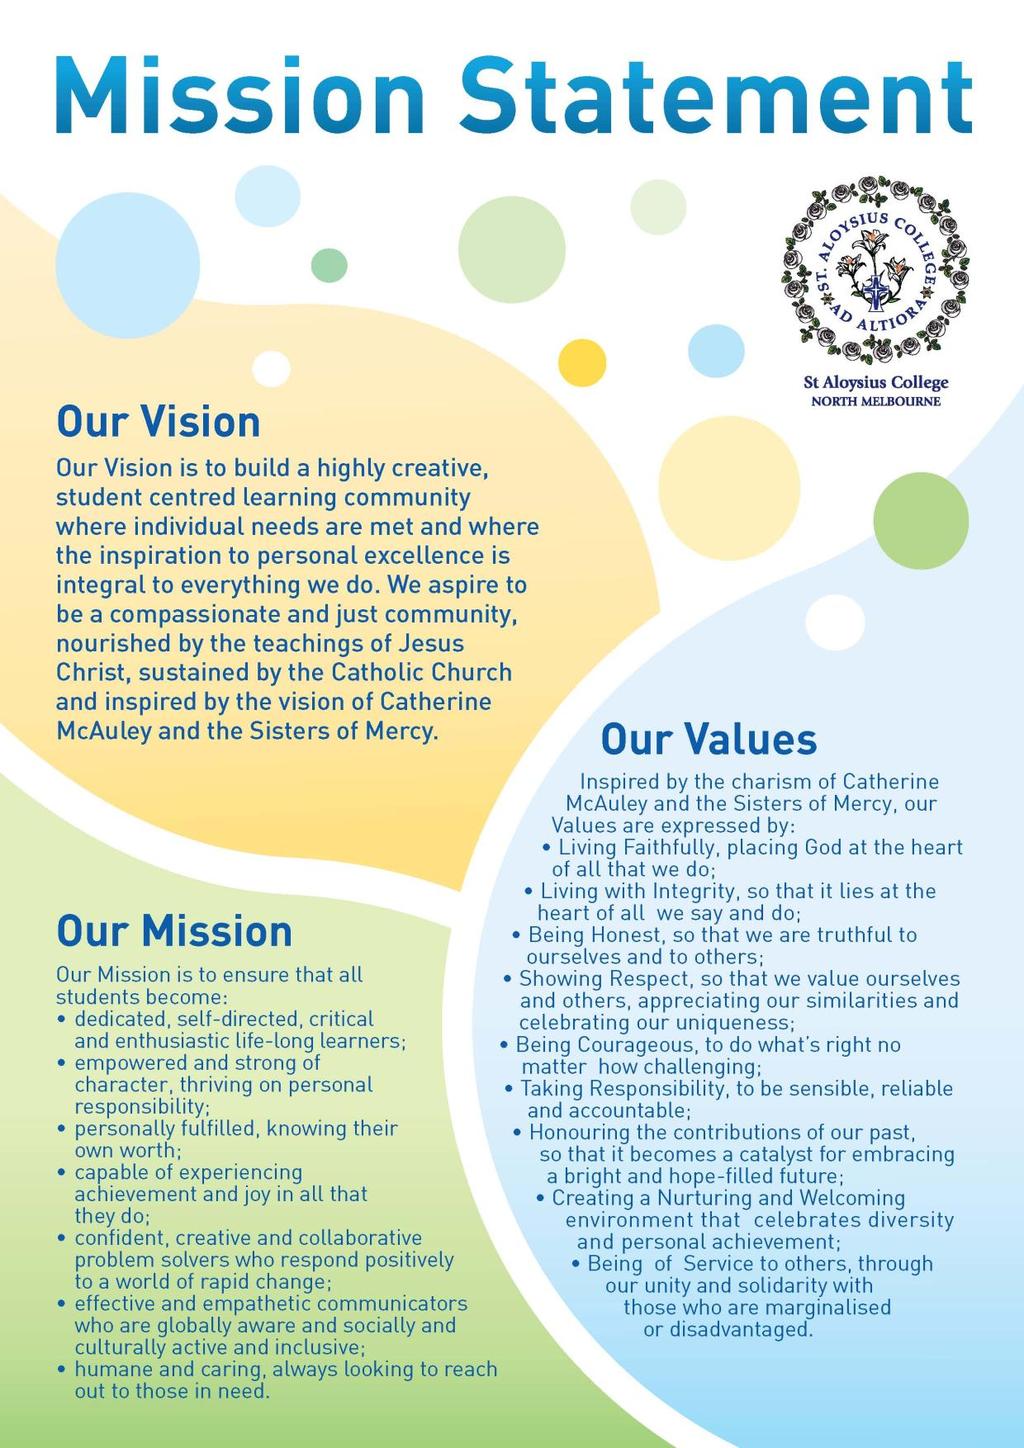 2013 ANNUAL REPORT TO